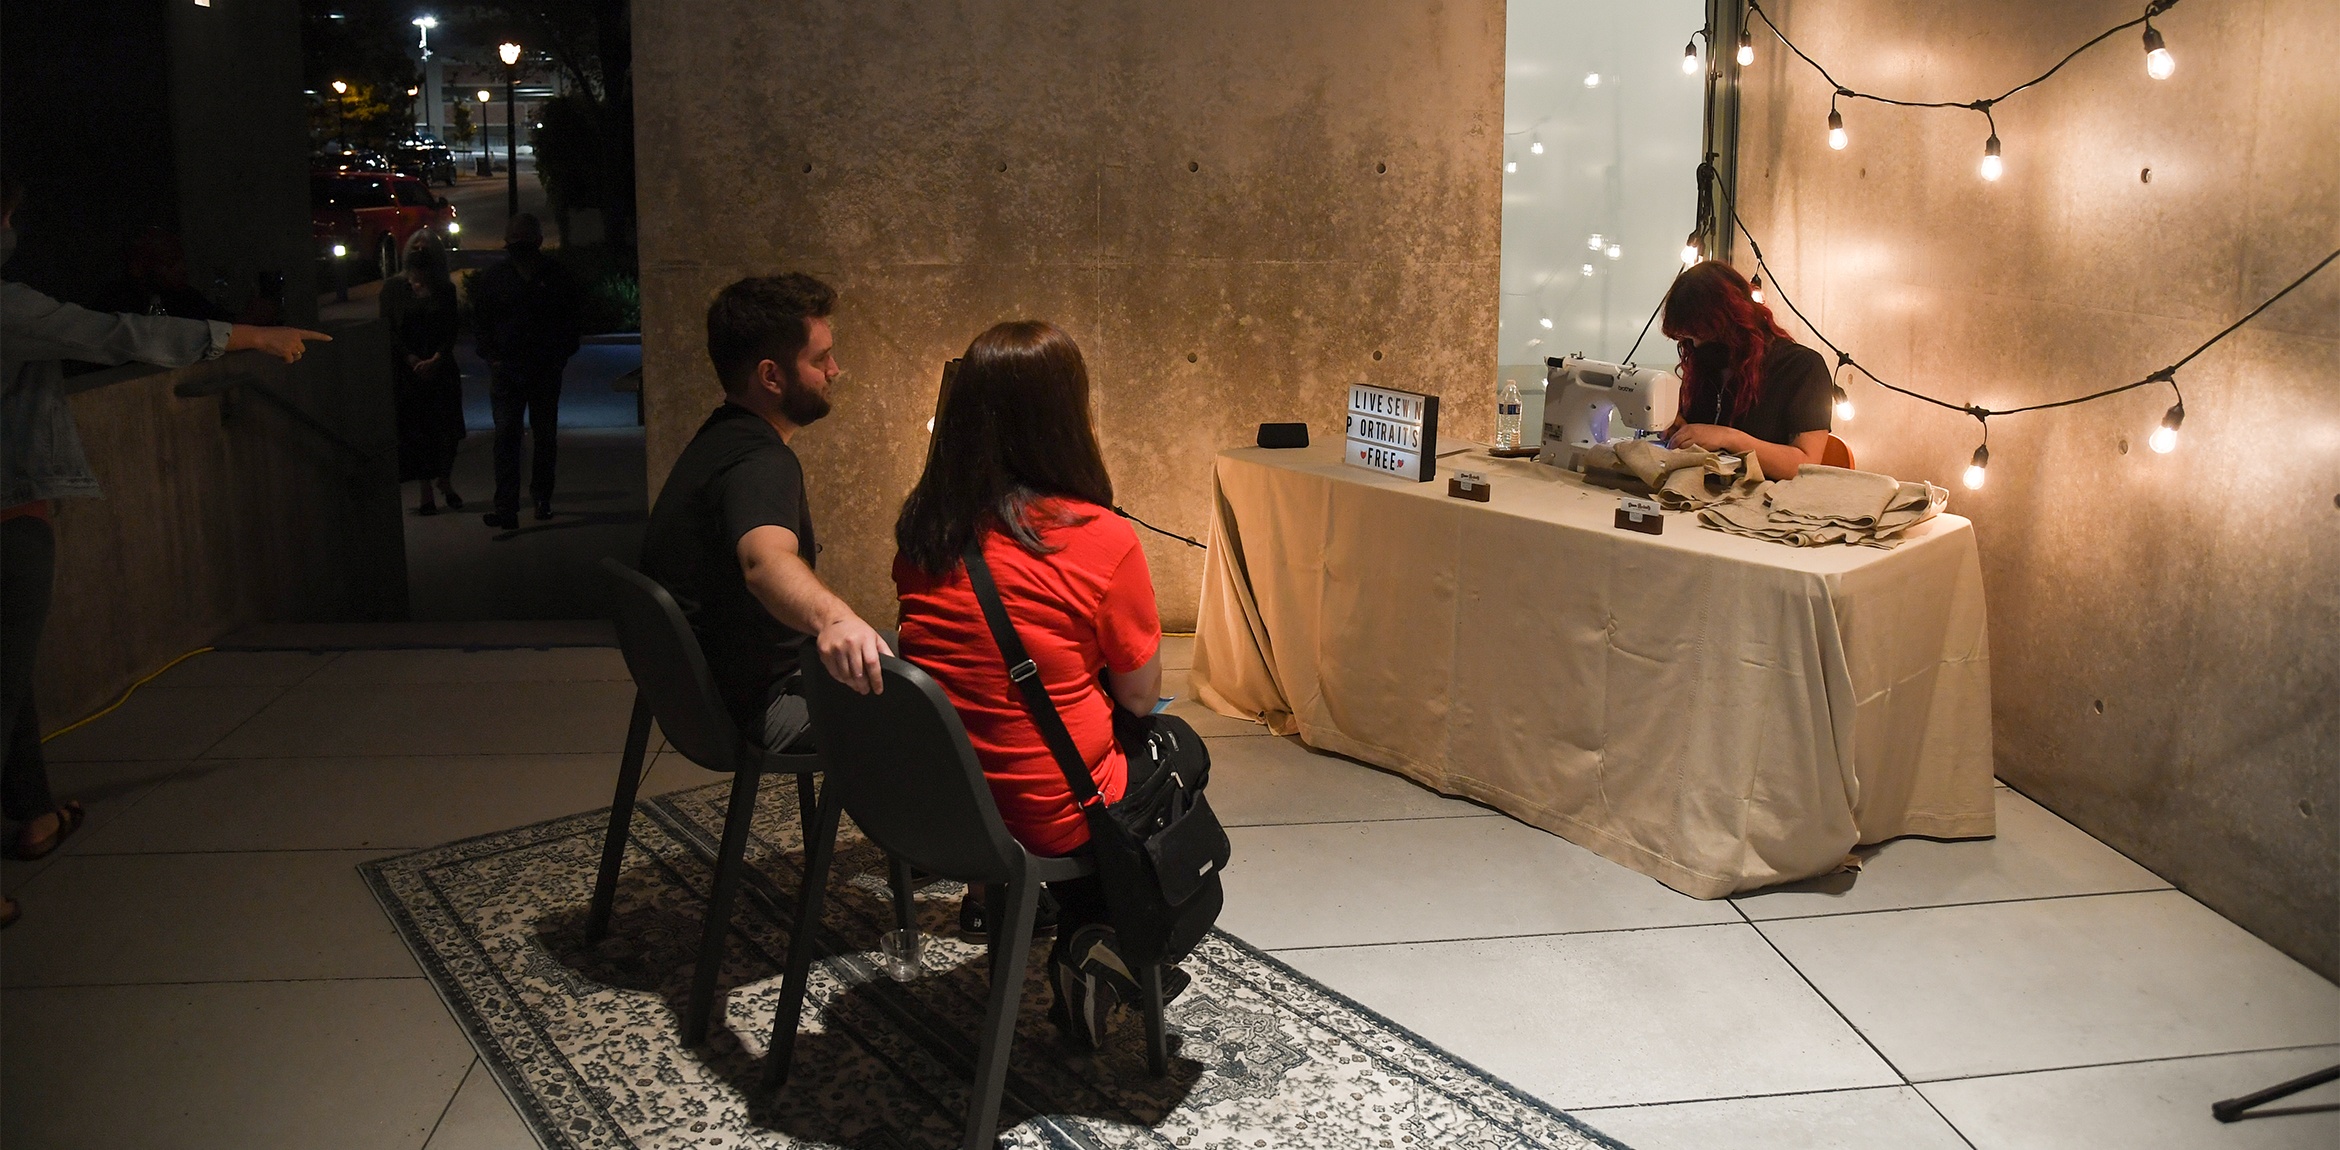 Artist Tucker Pierce sewing at a table with two visitors sitting for their portrait